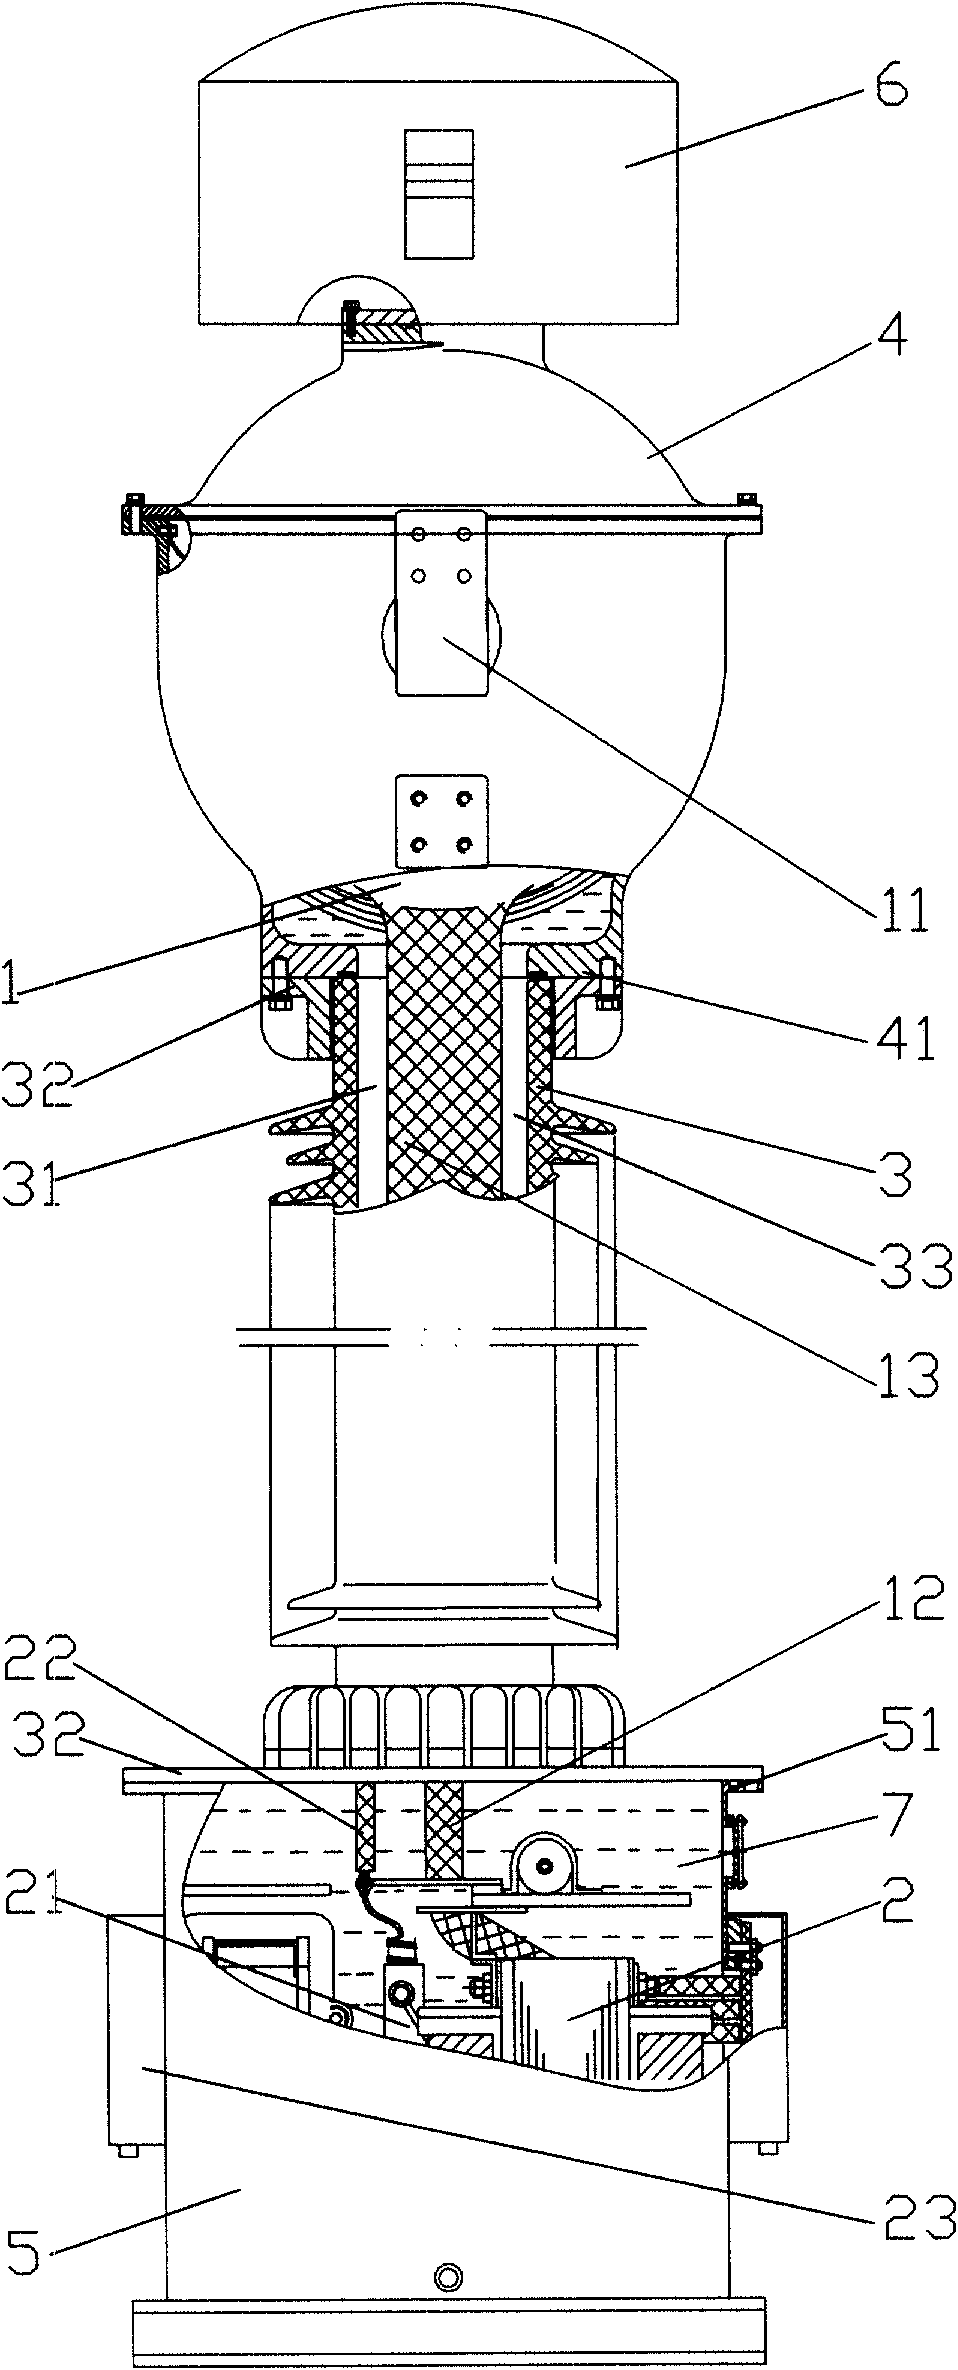 Combined high-tension current potential transformer